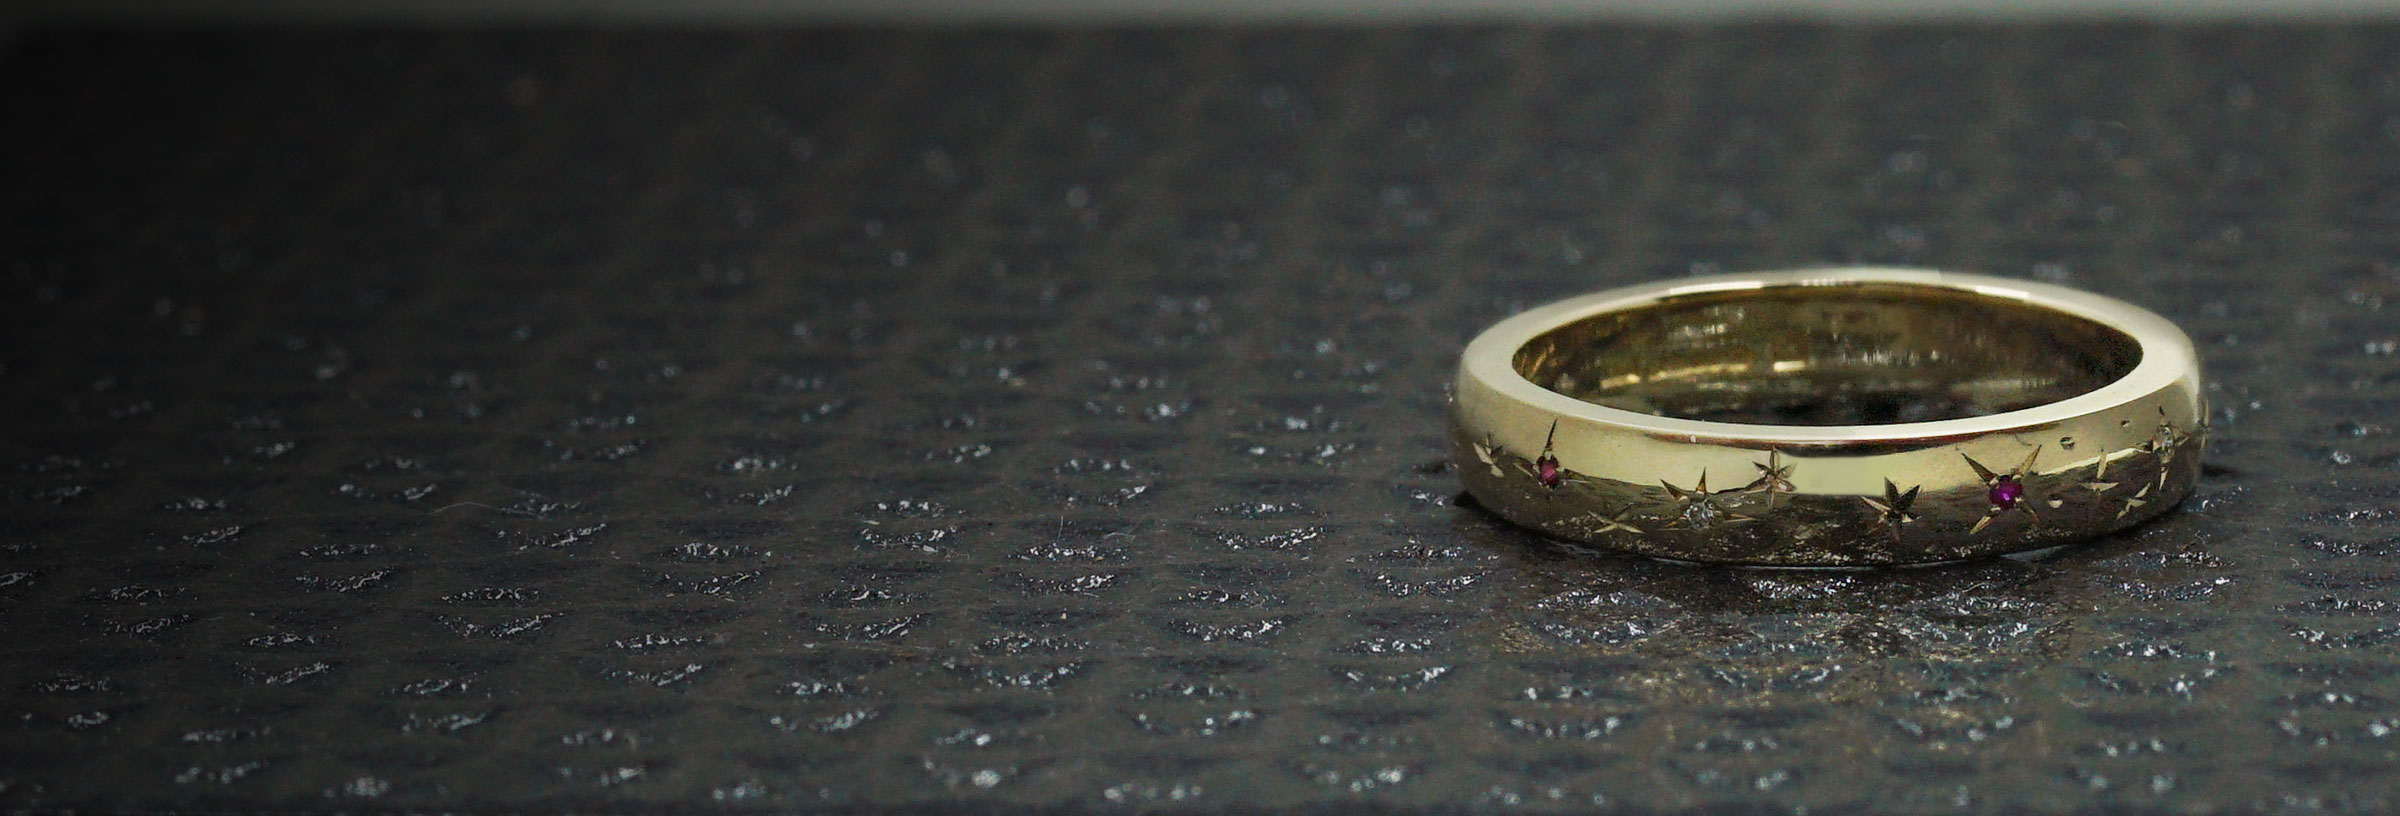 fairtrade-yellow-gold-eternity-ring-with-star-set-rubies-and-diamonds